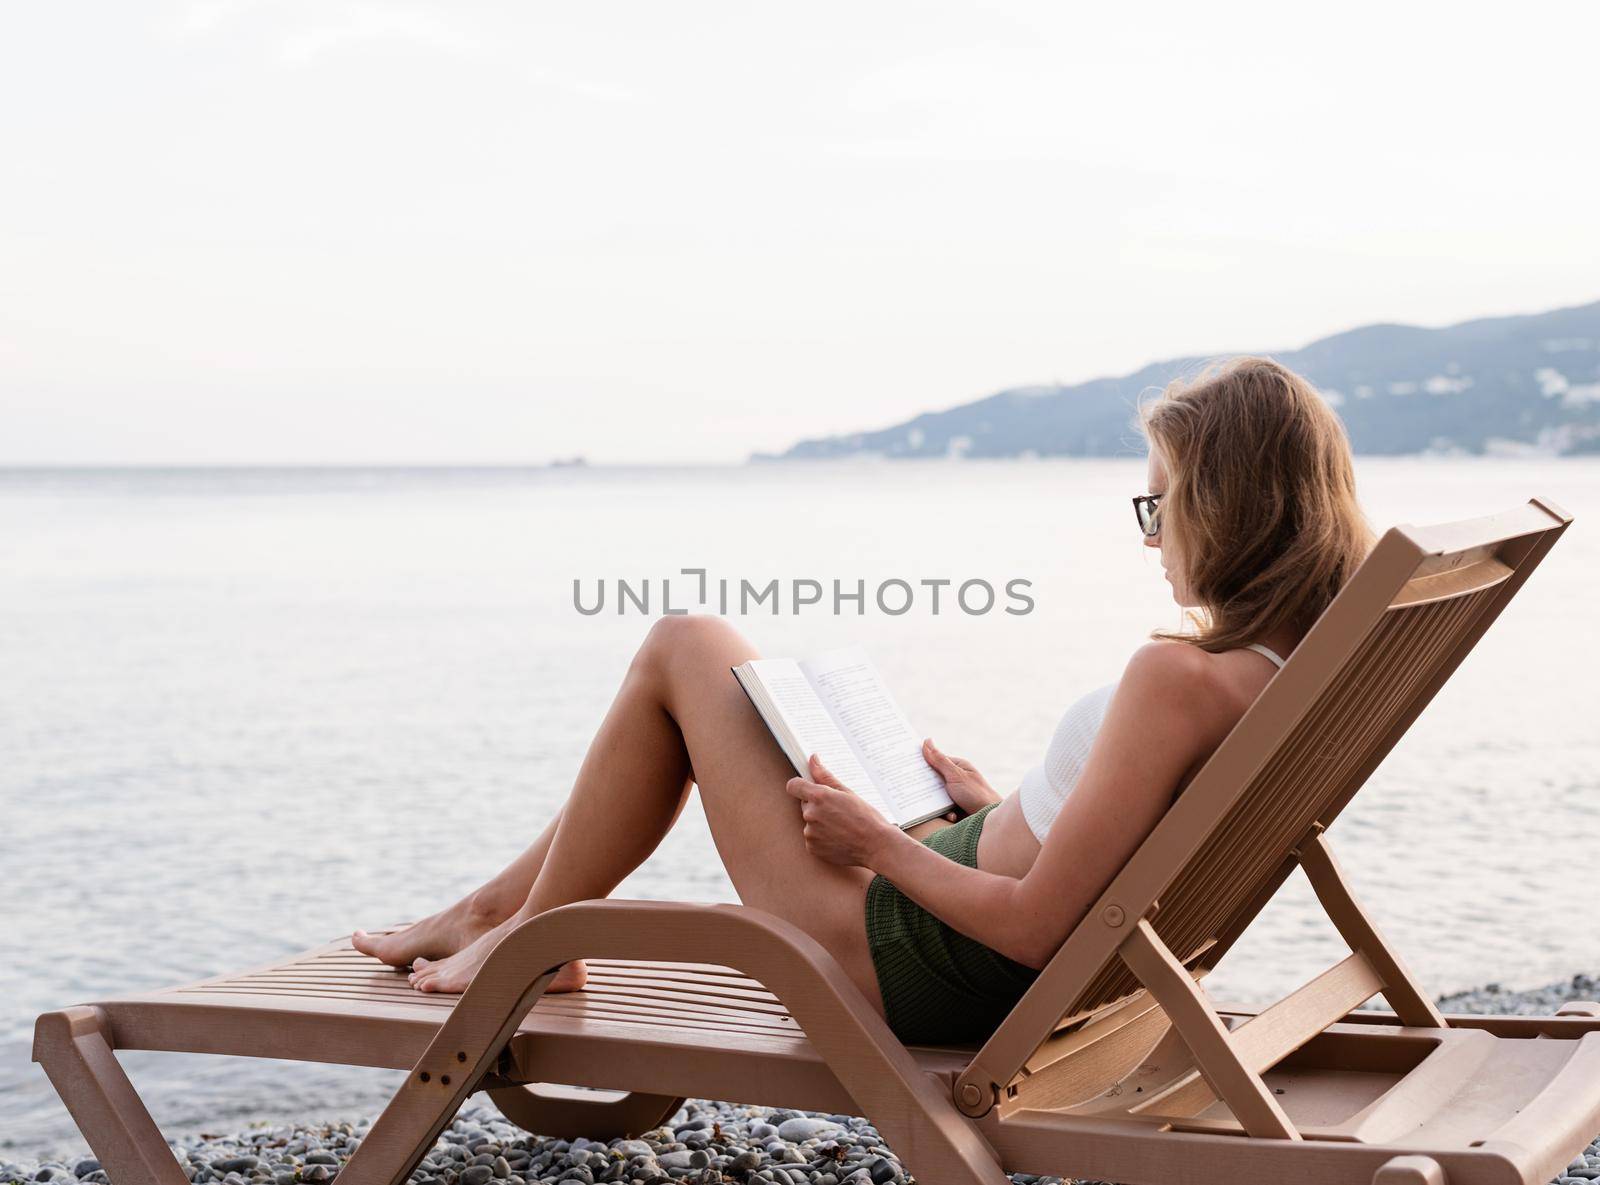 The beautiful young woman sitting on the sun lounger reading a book by Desperada